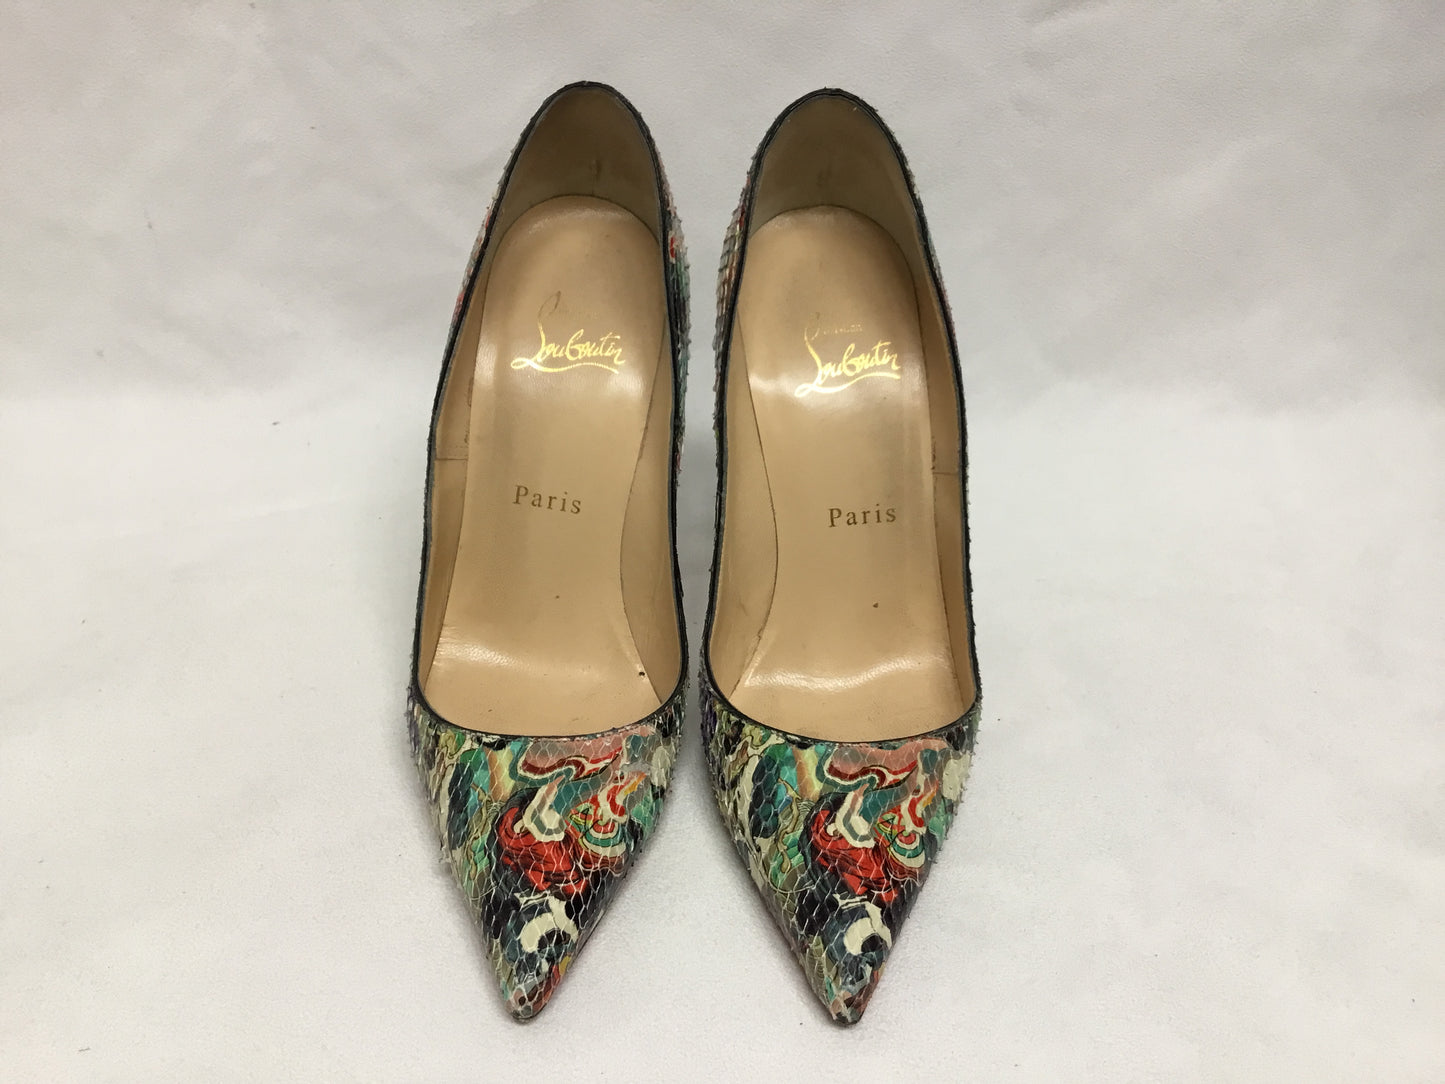 Louboutin Multicolor Abstract Printed Snakeskin So Kate Pumps